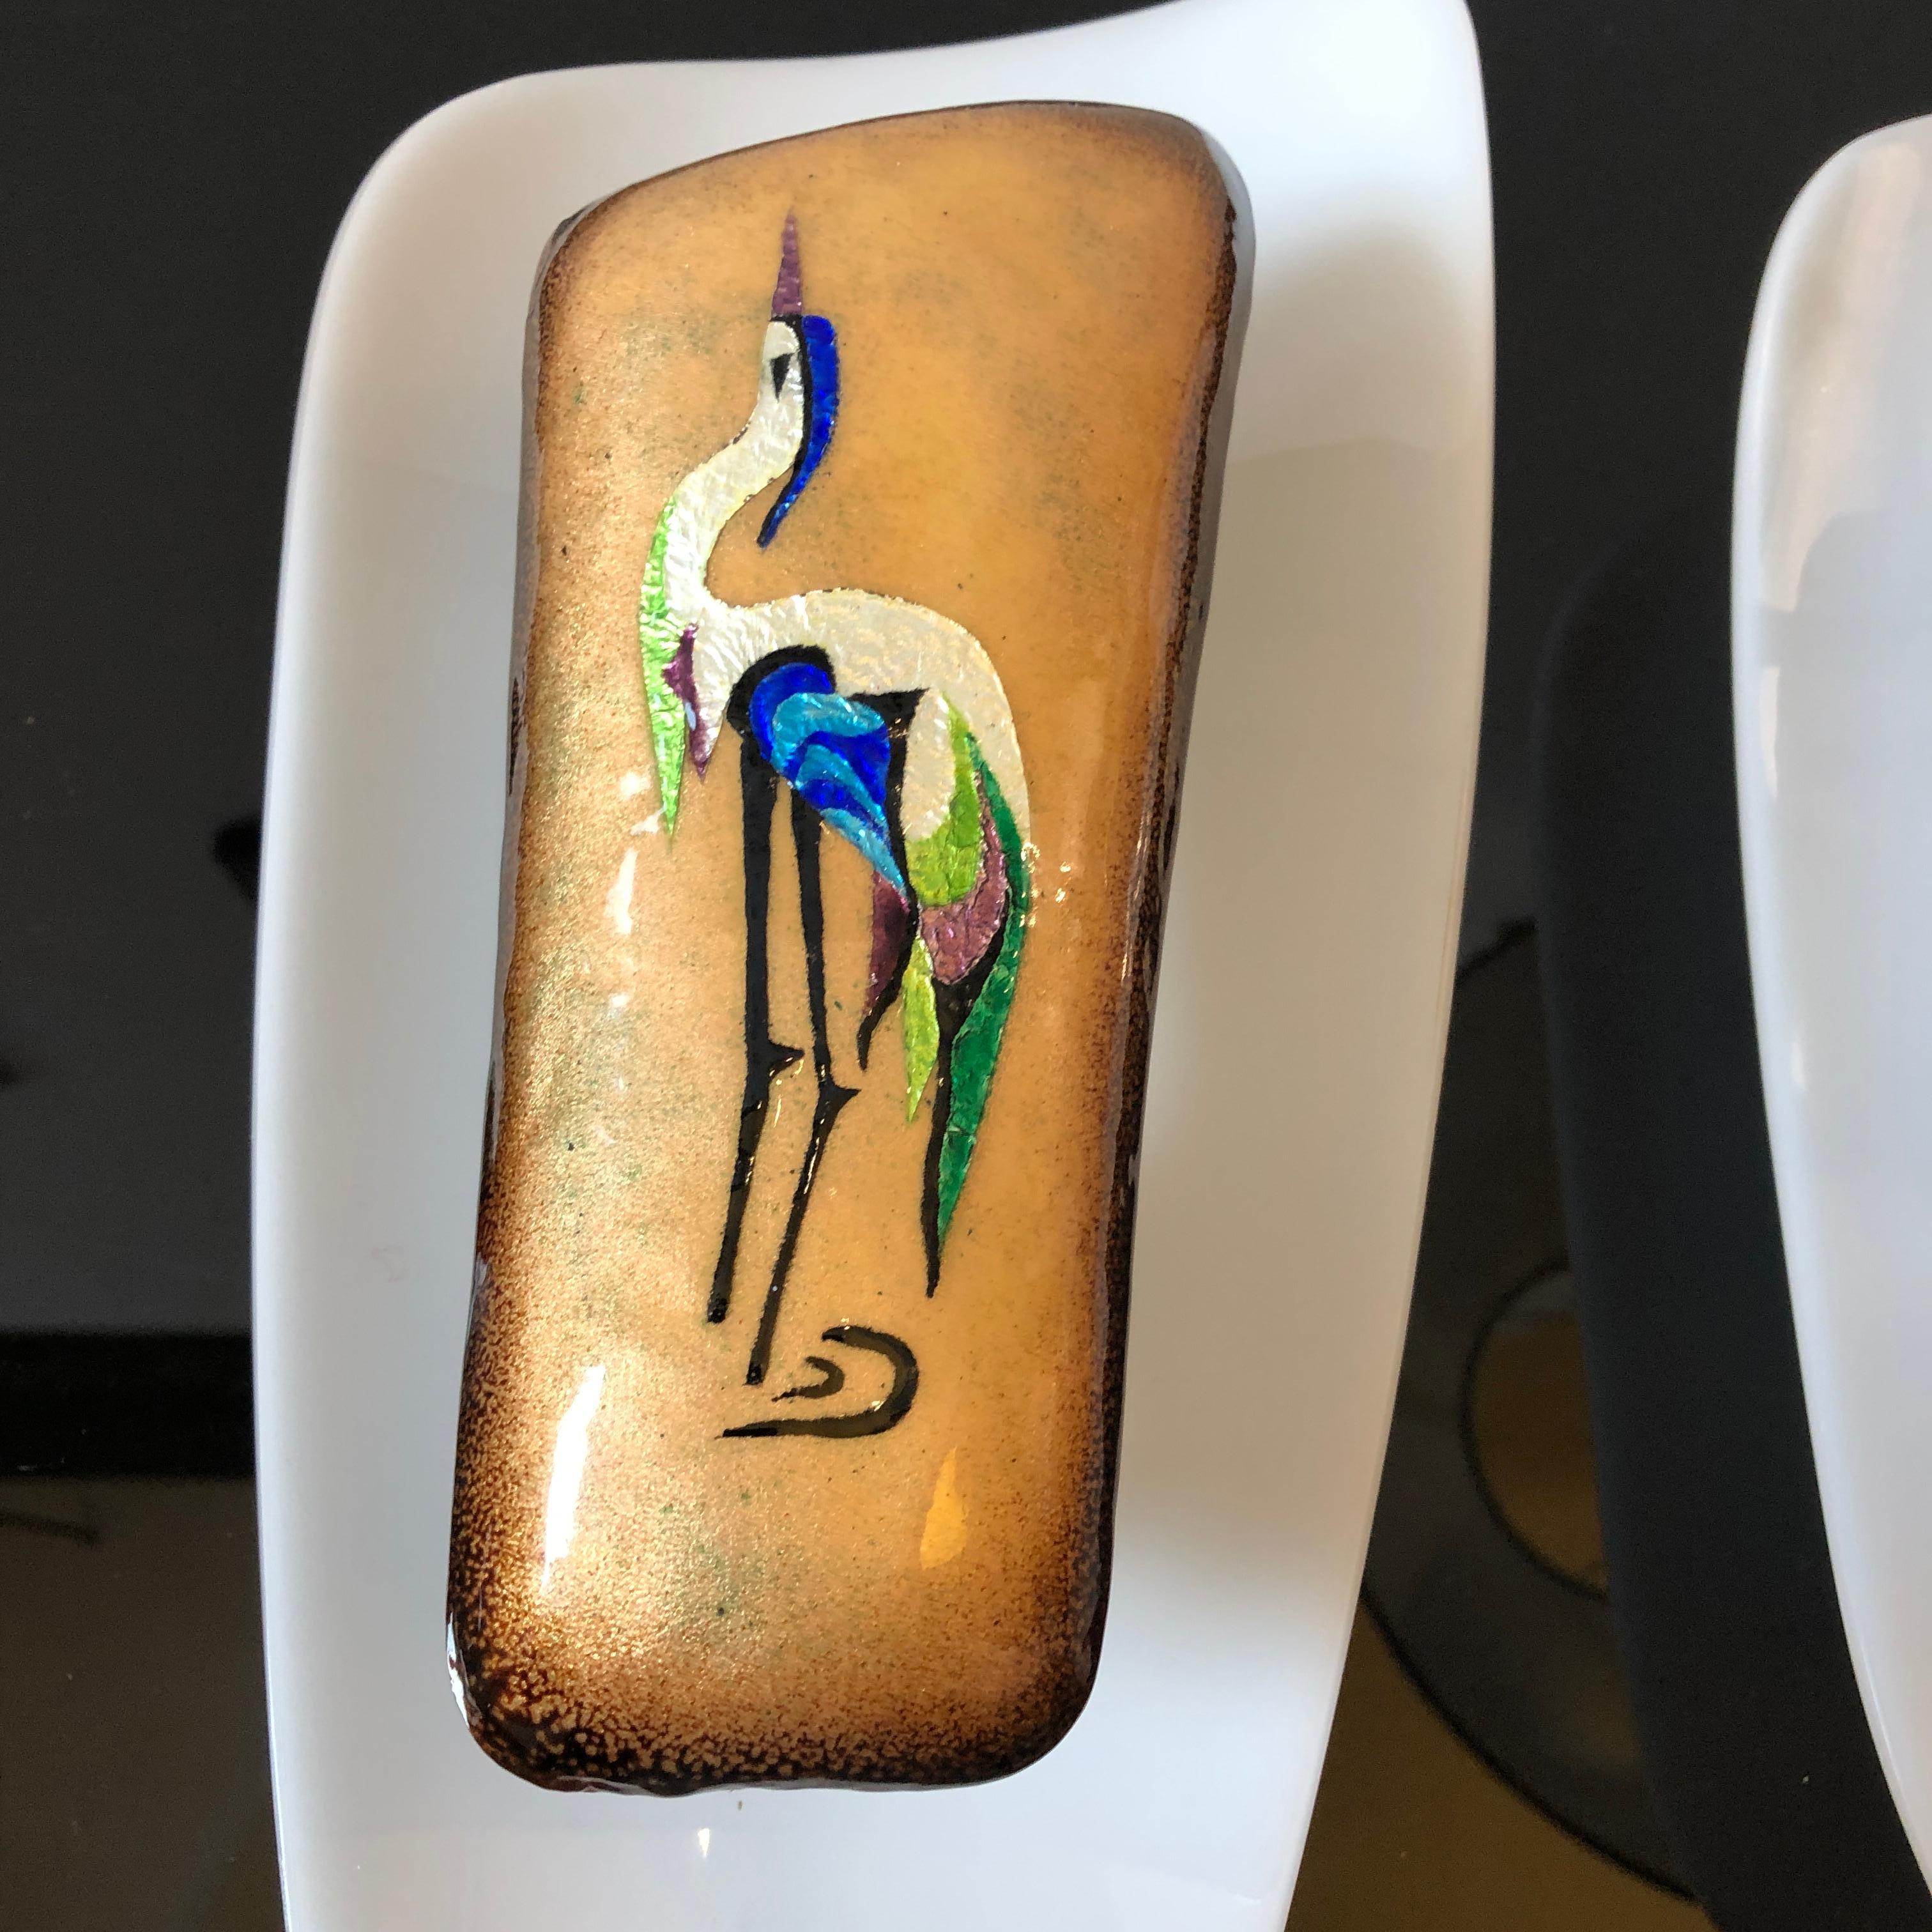 Stylish set of Mid-Century Modern hand painted and enameled wall sconces by Paolo De Poli, he worked for Gio Ponti in the period. they are made in copper and plexiglass. They work 110-240 volts and need regular e14 bulbs.